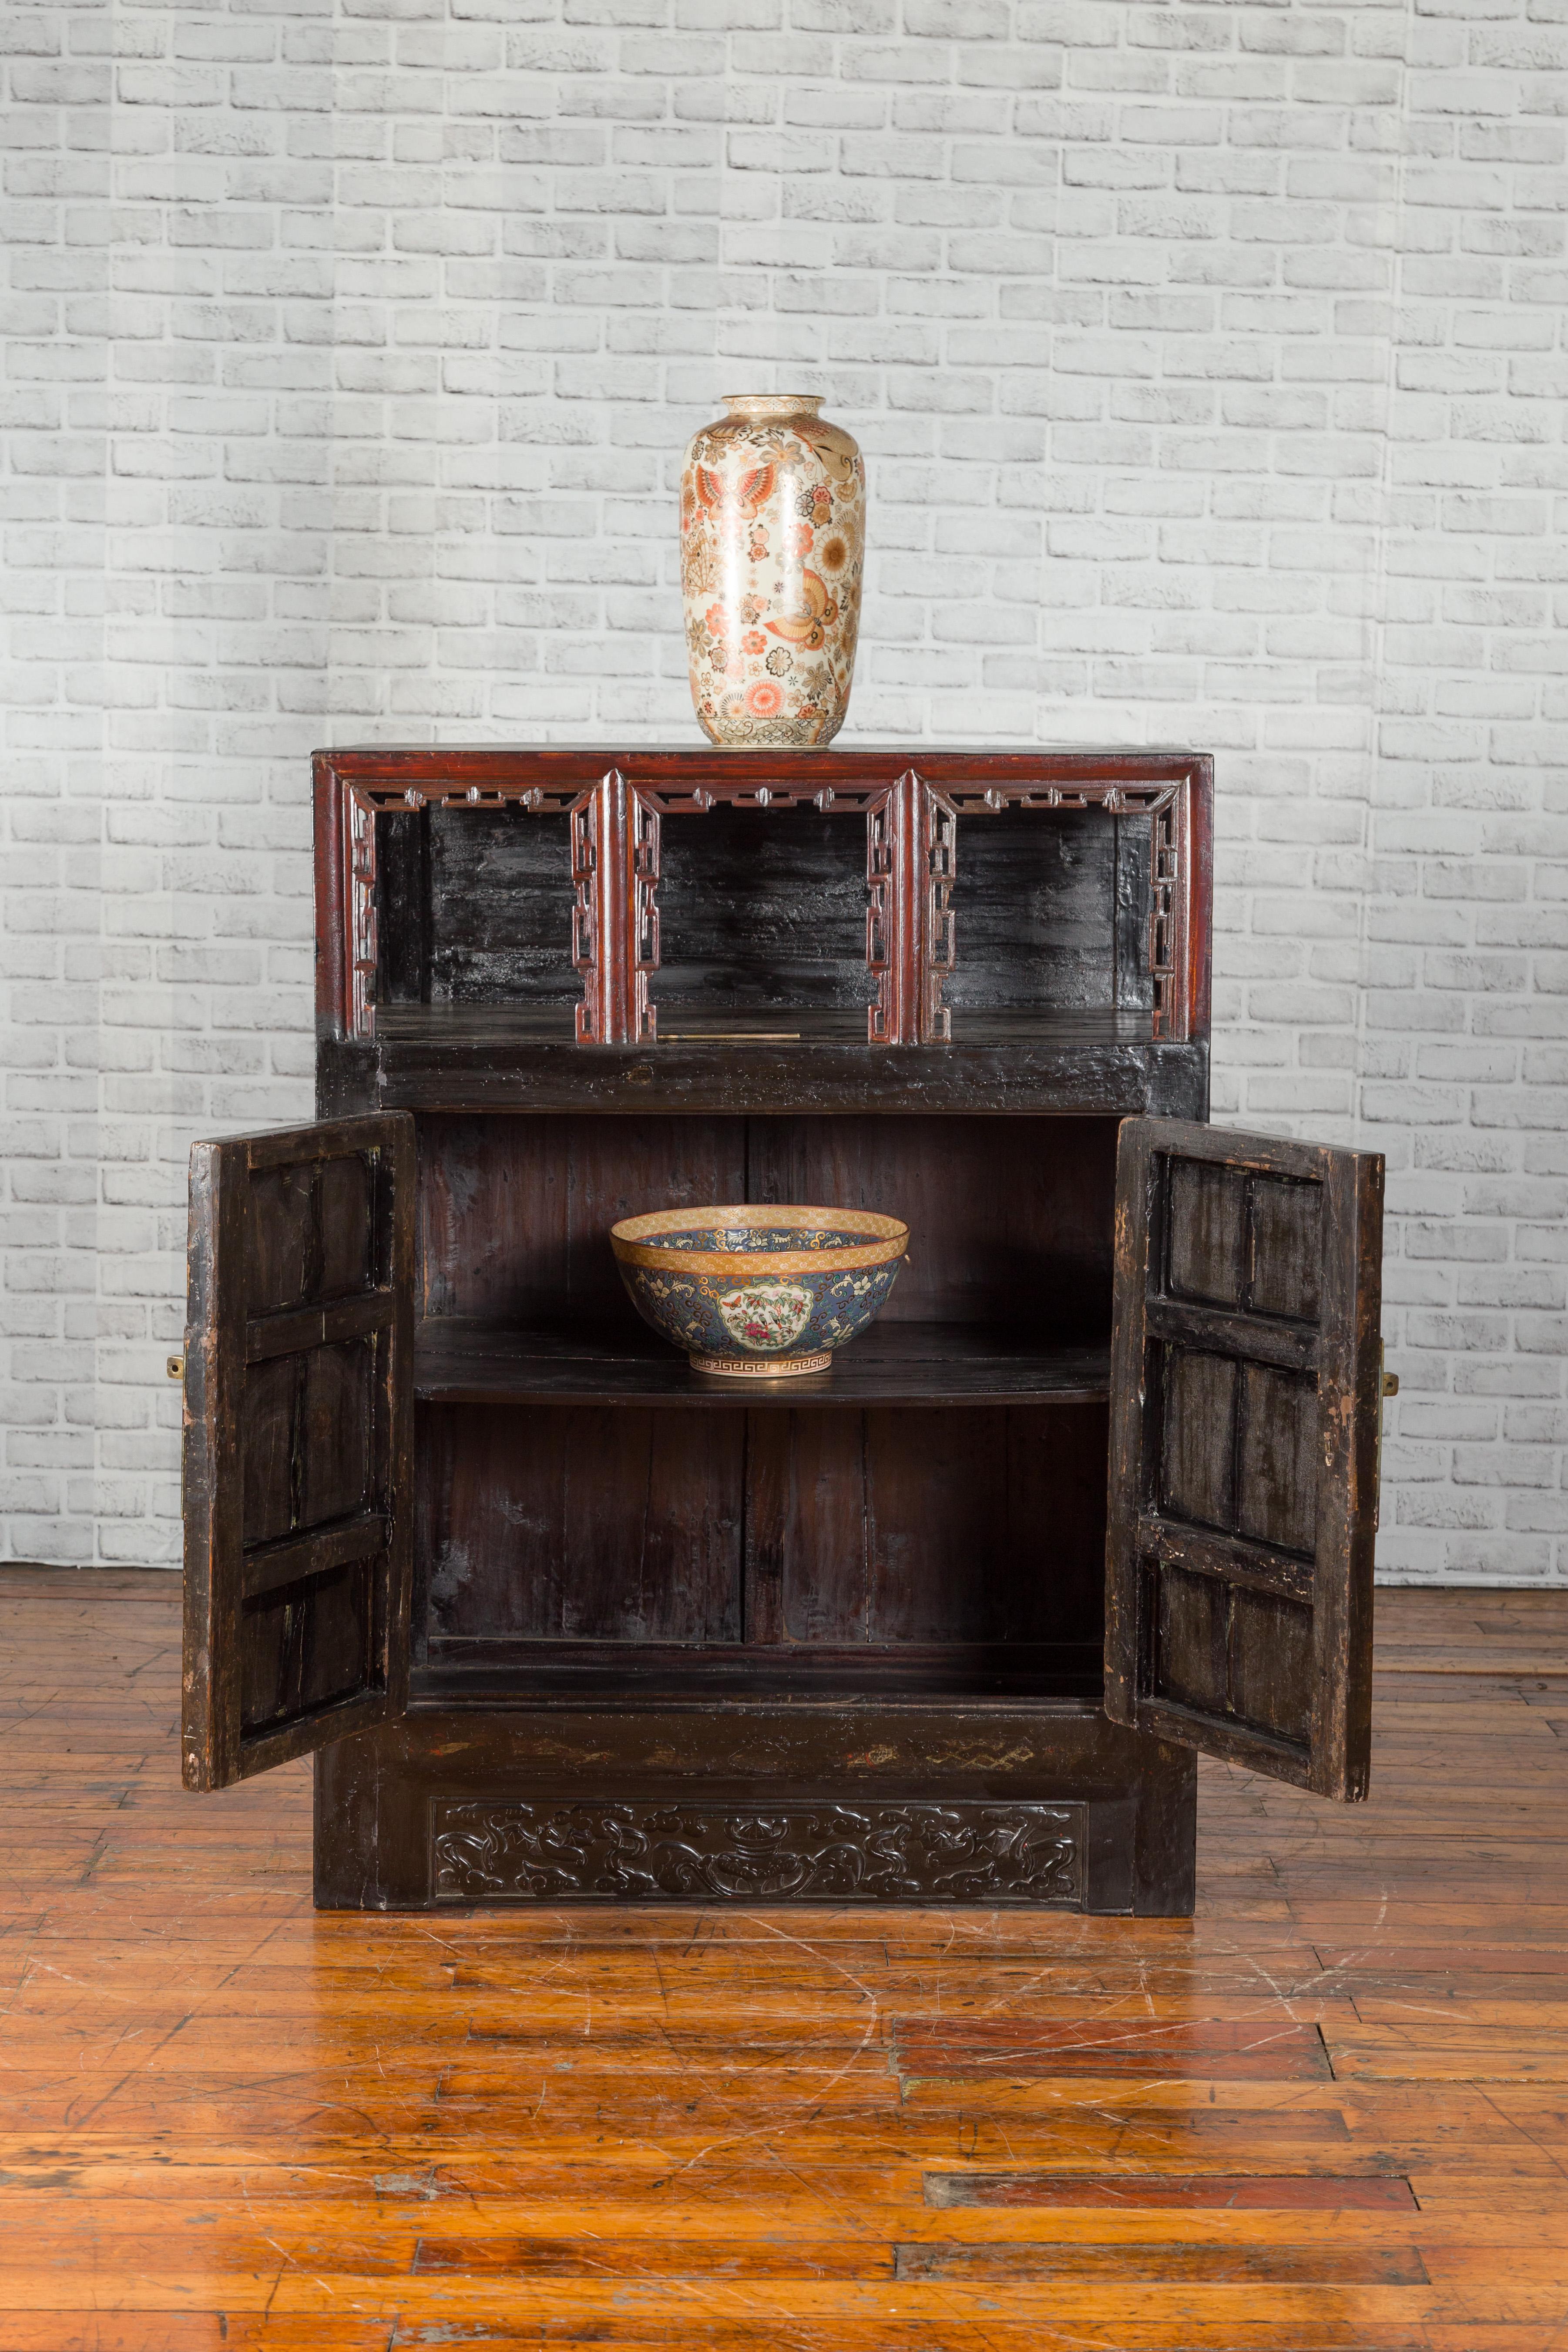 Chinese Qing Dynasty Period 19th Century Cabinet with Original Brown Lacquer In Good Condition For Sale In Yonkers, NY